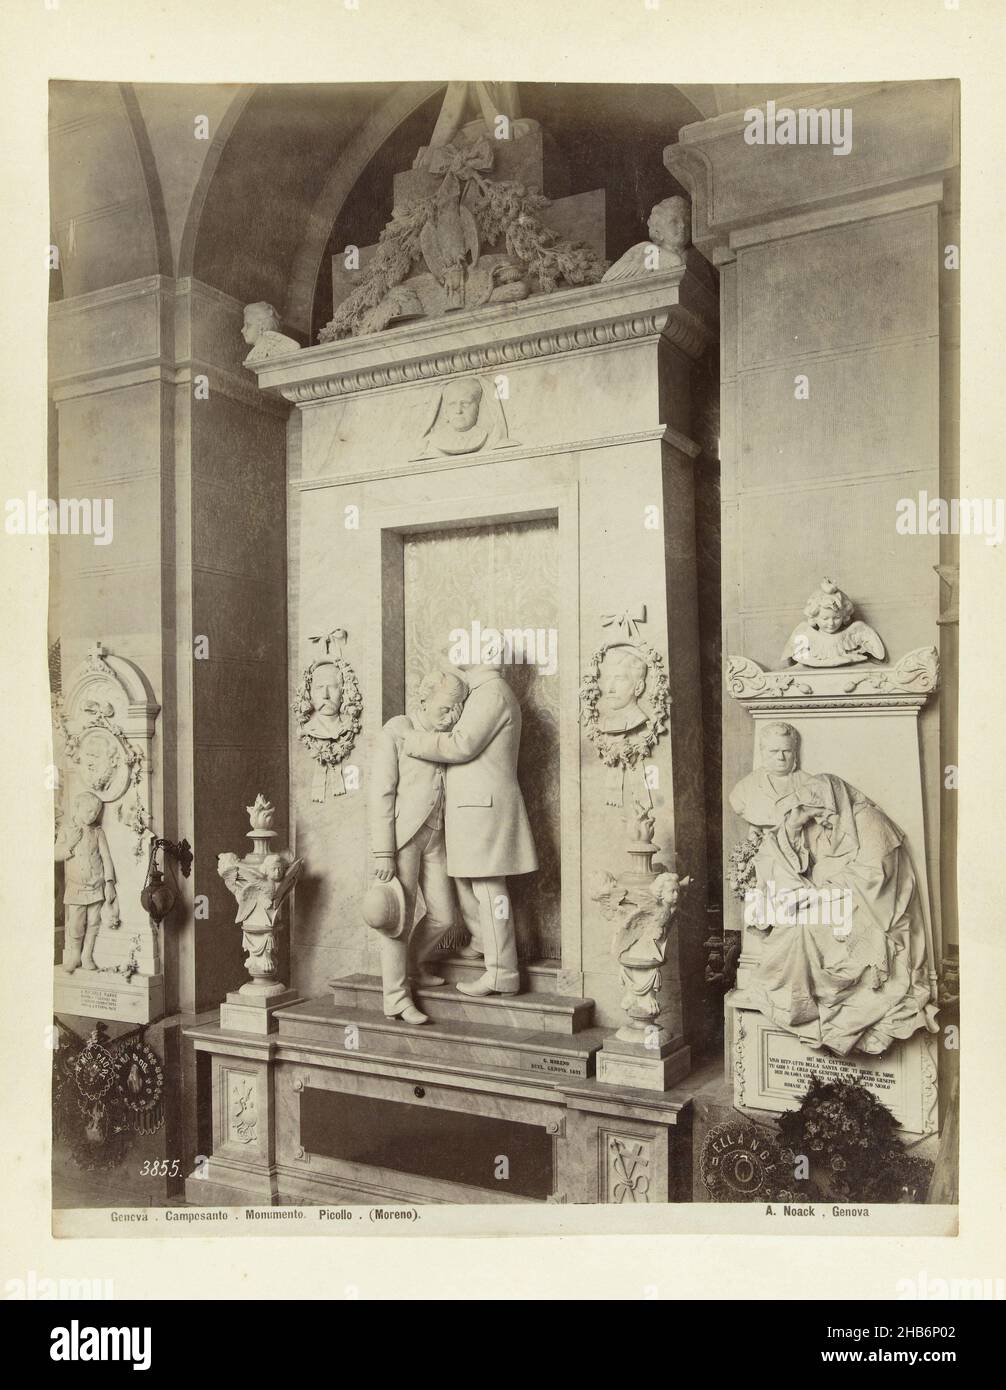 Tomb monument in marble topped with a statue of a man comforting another man3855. Genova Camposanto Monumento Picollo (Moreno) A. Noack, Genova. (title on object), Alfredo Noack (mentioned on object), Genua, c. 1881 - c. 1900, photographic support, albumen print, height 260 mm × width 207 mmheight 277 mm × width 367 mm Stock Photo